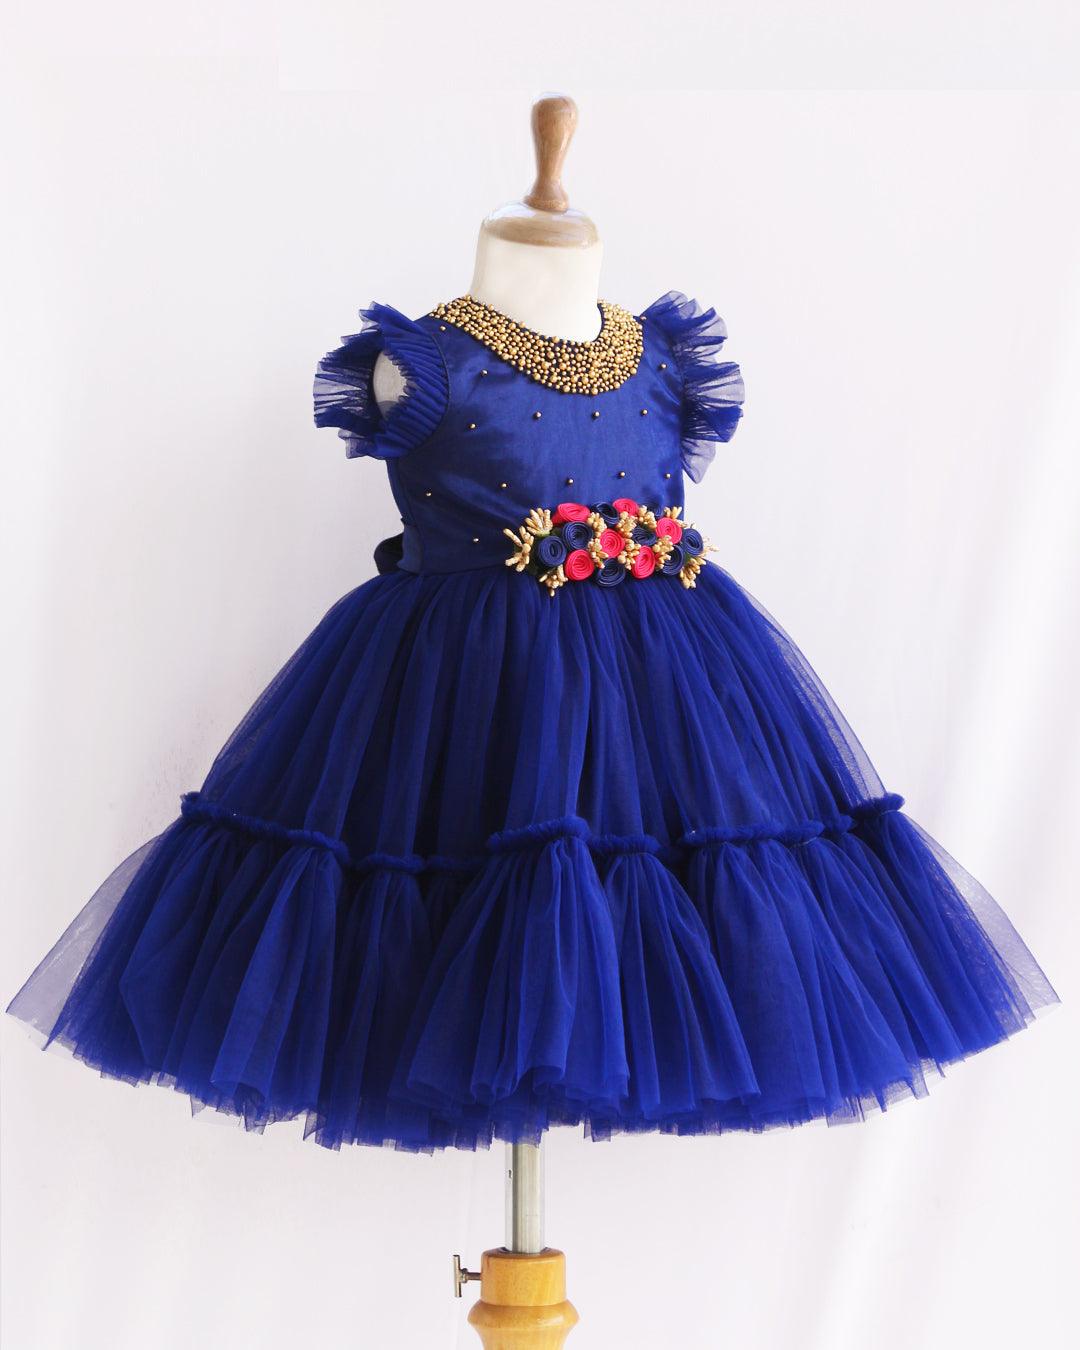 Navyblue Shade Handwork Flower Frock
Material:  Navy blue shade mono nylon net fabric with premium glossy satin as lining. Inner portion is covered with premium ultra satin and white cotton lining. Cen